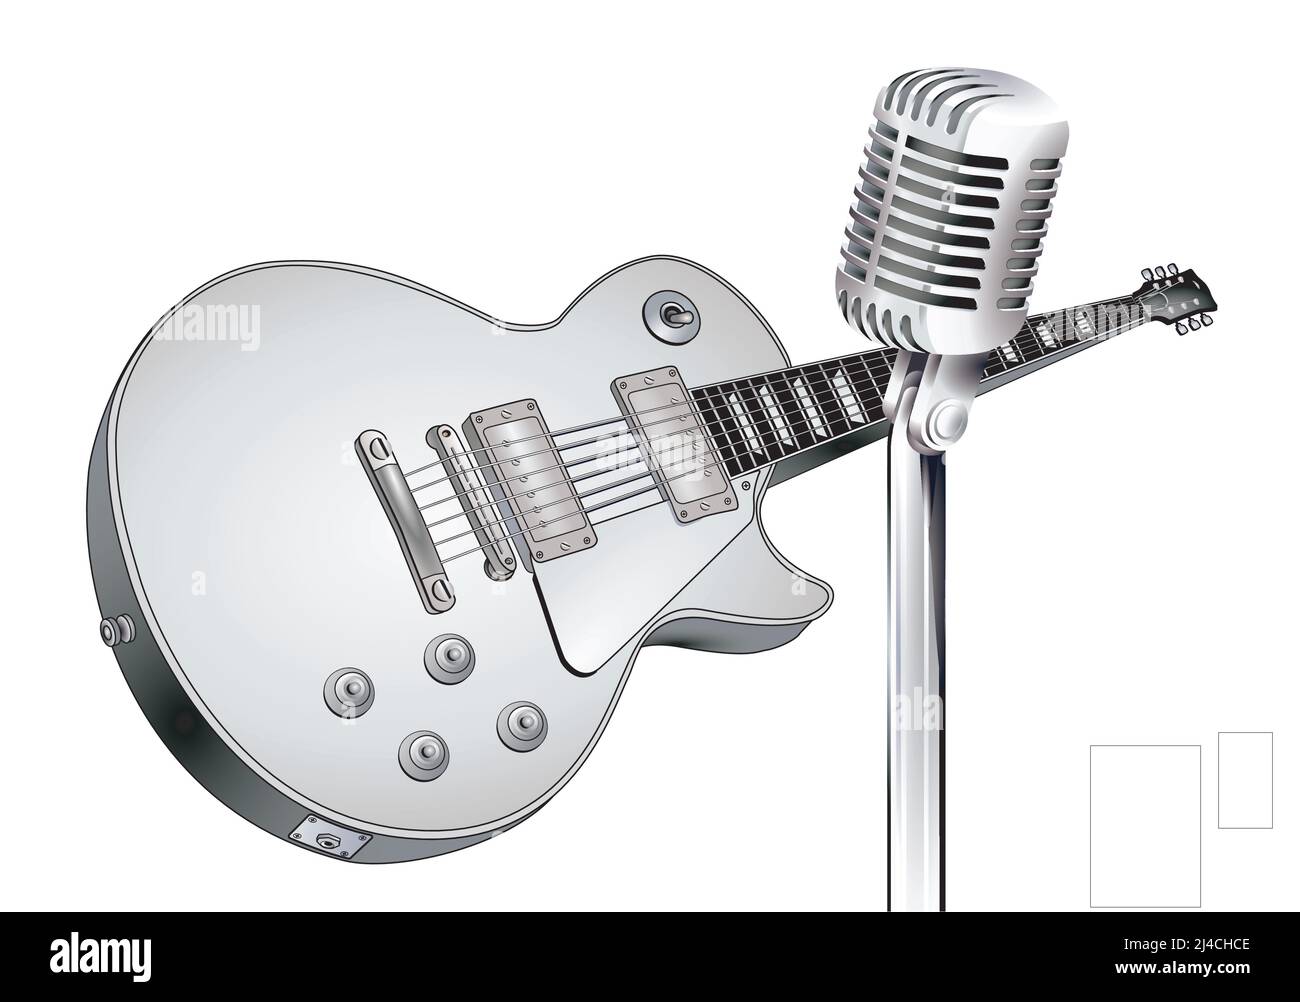 Musical instrument guitar and microphone, isolated on white illustration Stock Vector